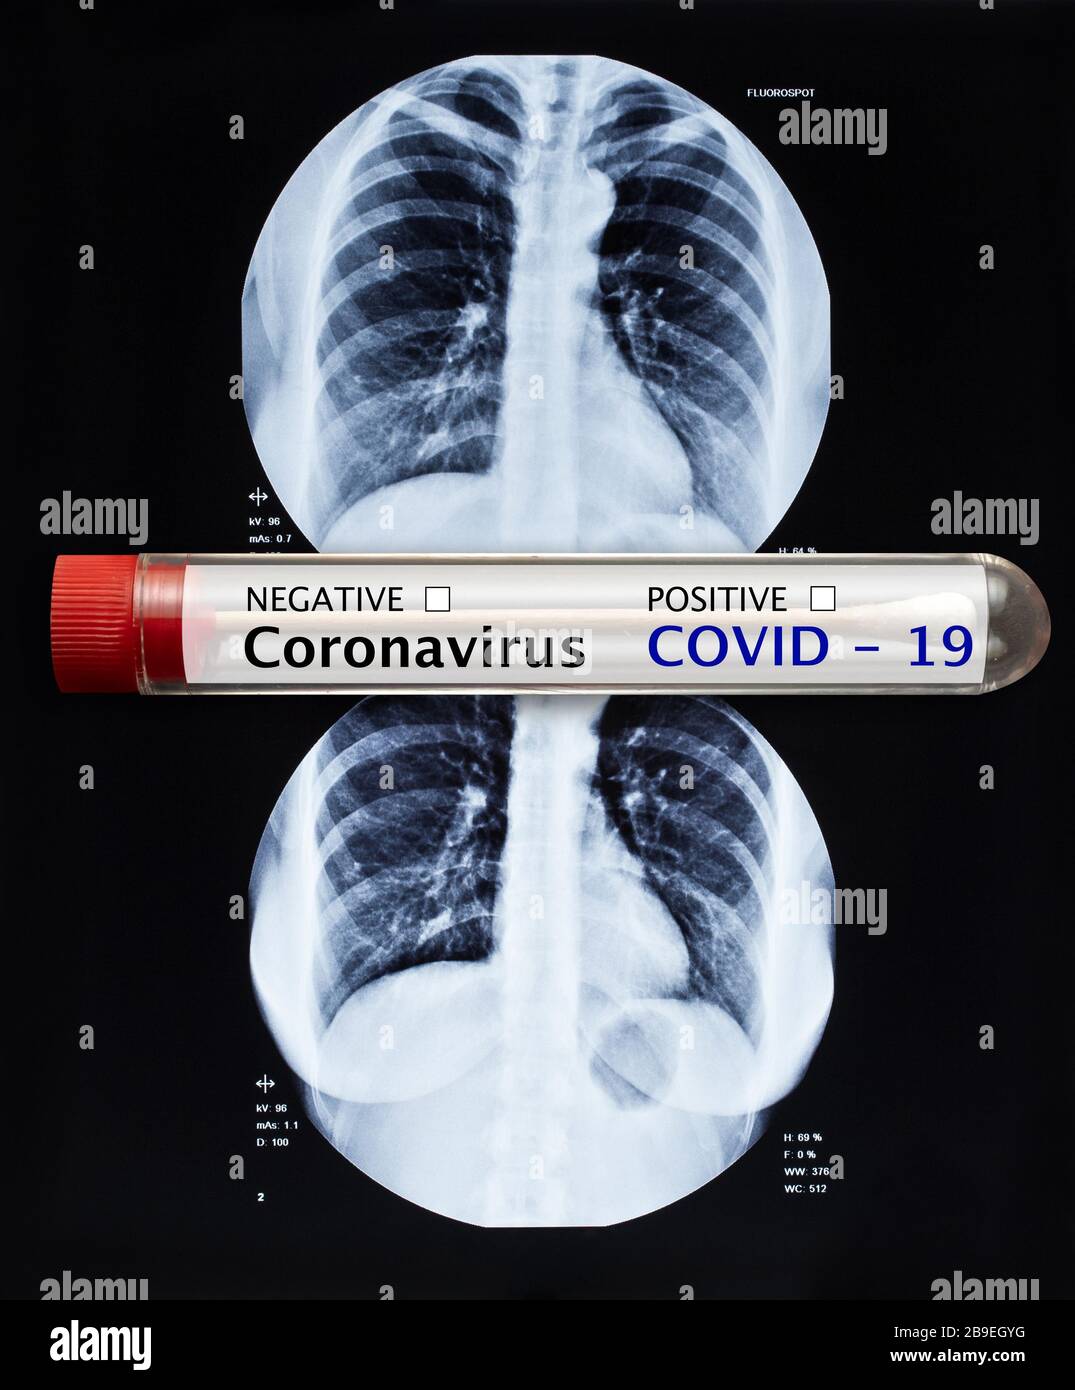 Coronavirus blood  test tube and X-Ray Image Of Human Chest for a medical diagnosis. Covid-19 pandemics Stock Photo